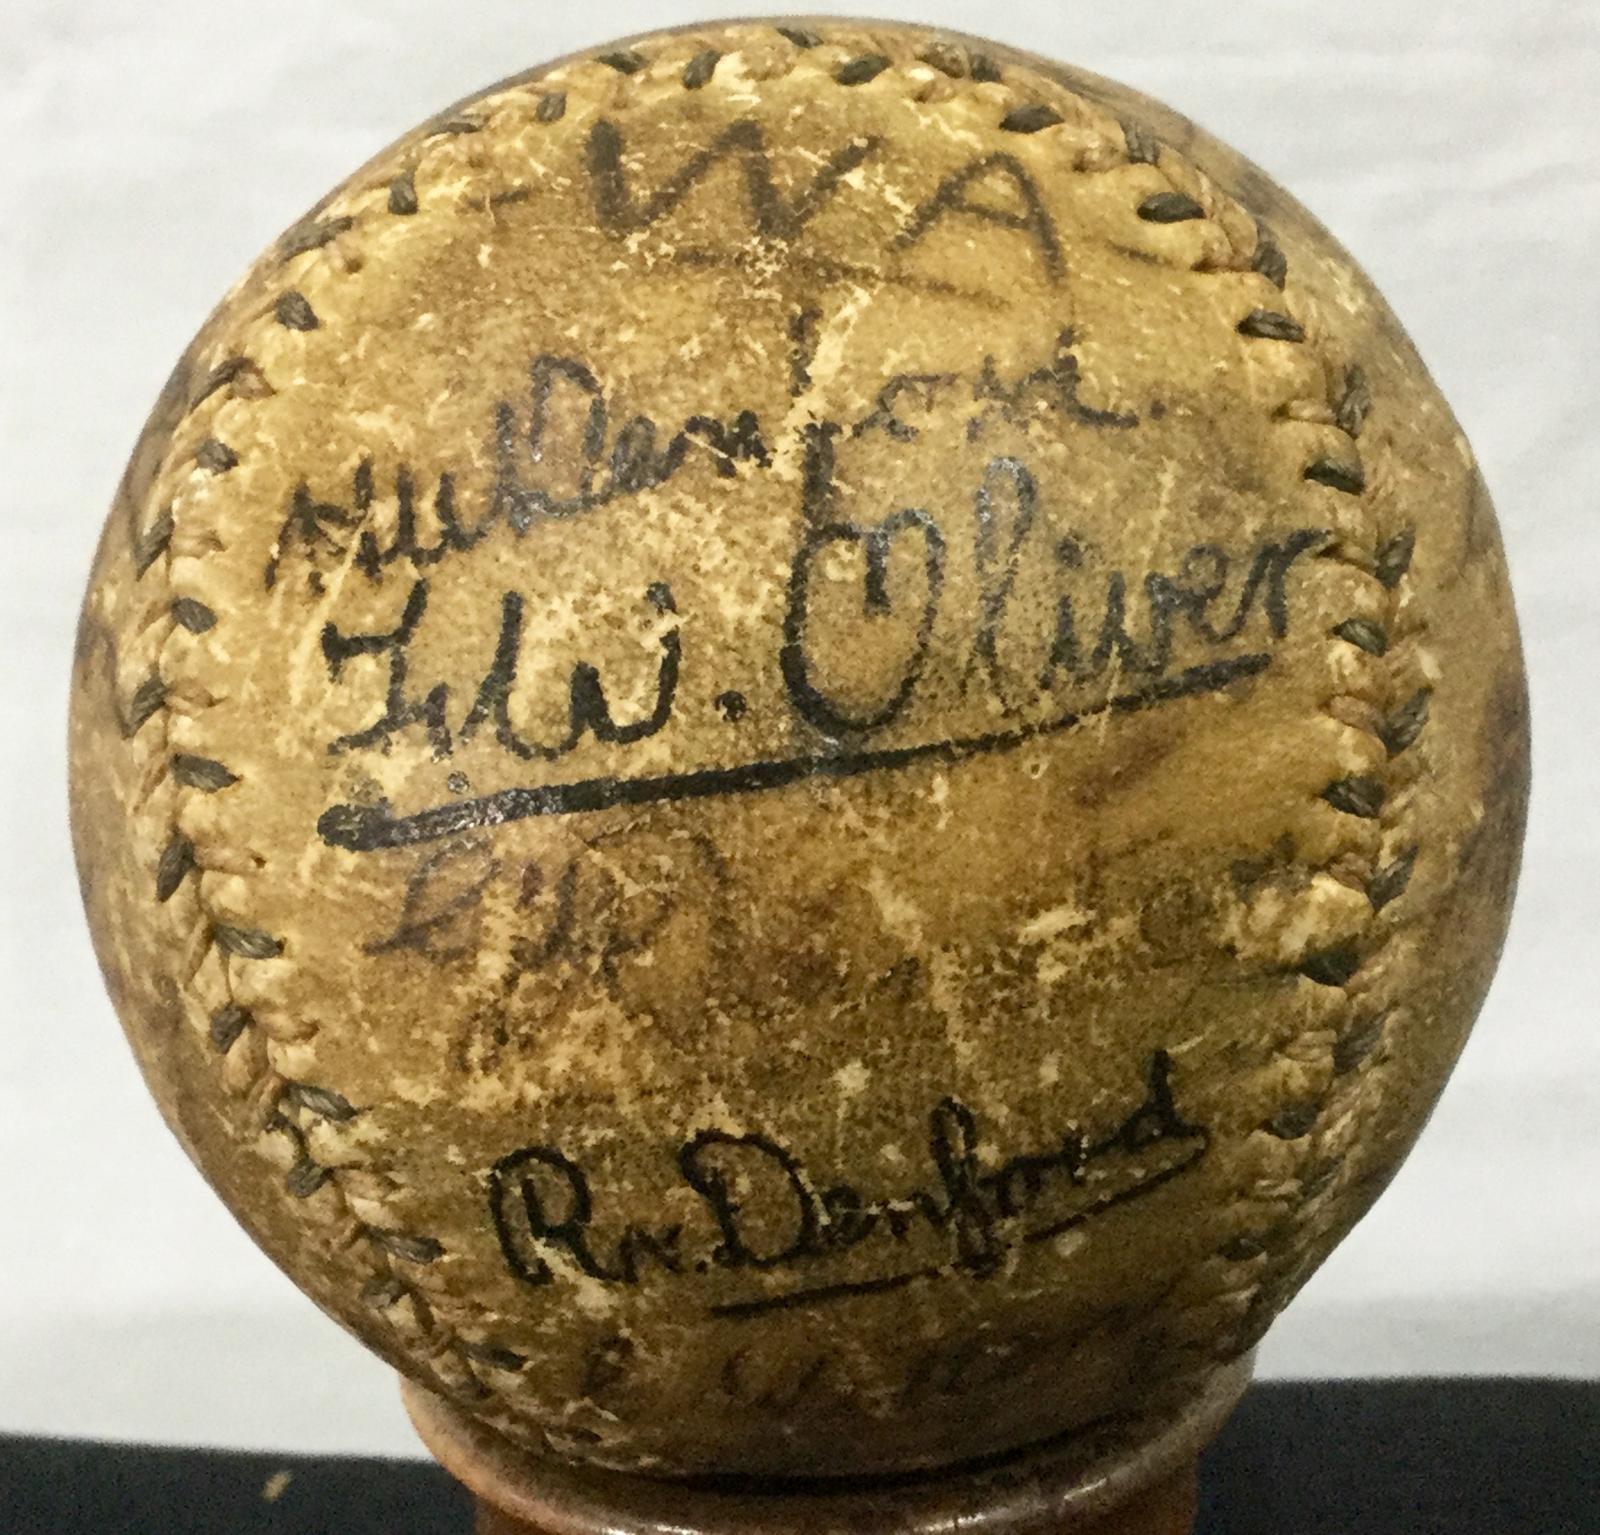 1936 baseball from the first-ever games between Western Australia and Victoria